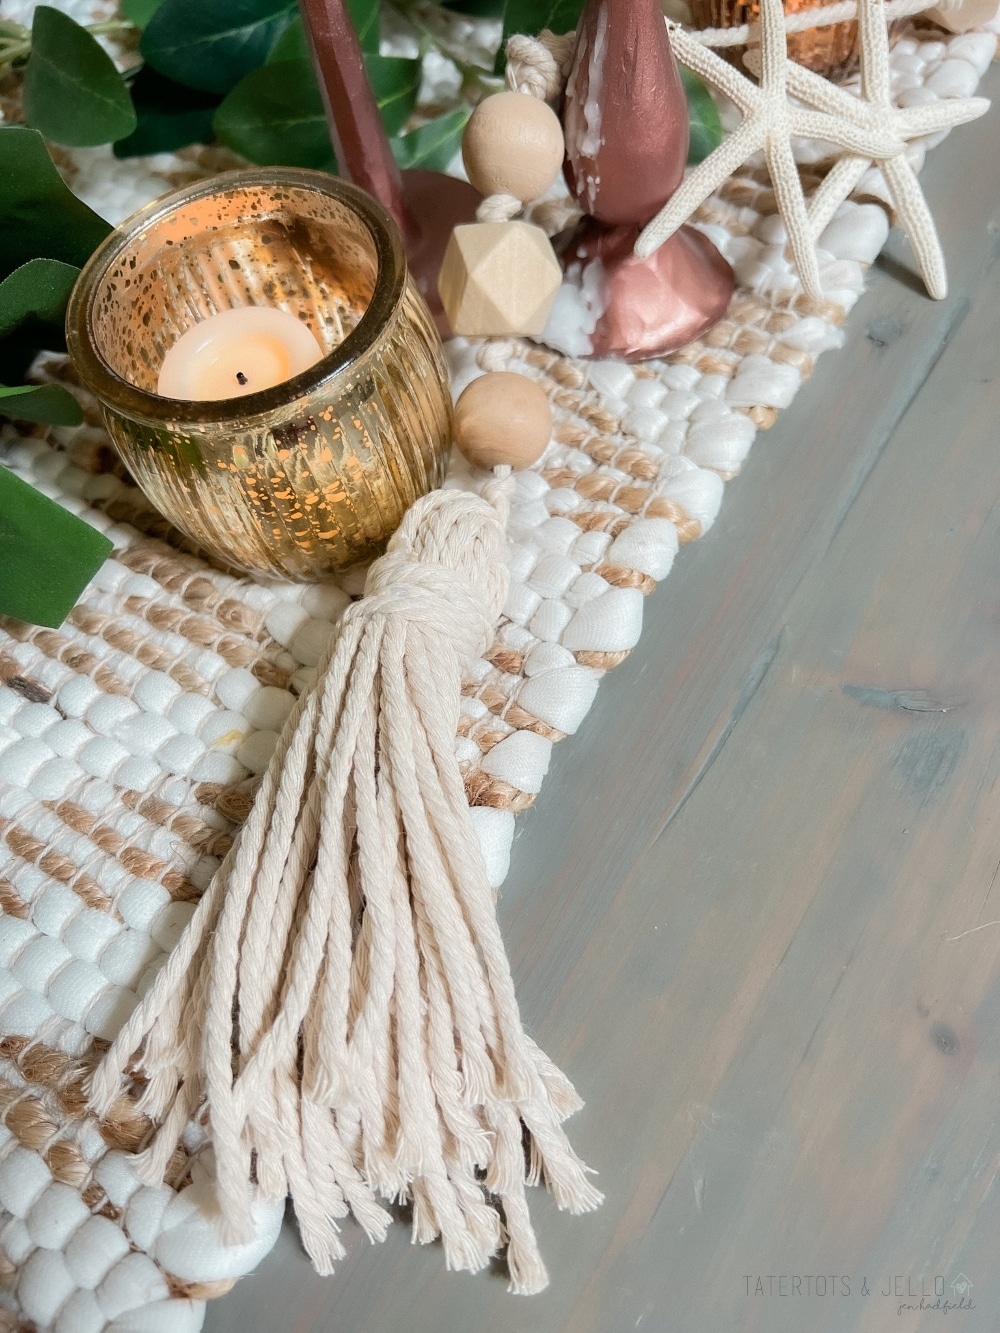 DIY Tassel and Bead Starfish Garland. Add a little boho flair to your home with this easy beaded boho starfish garland with tassels on both ends.